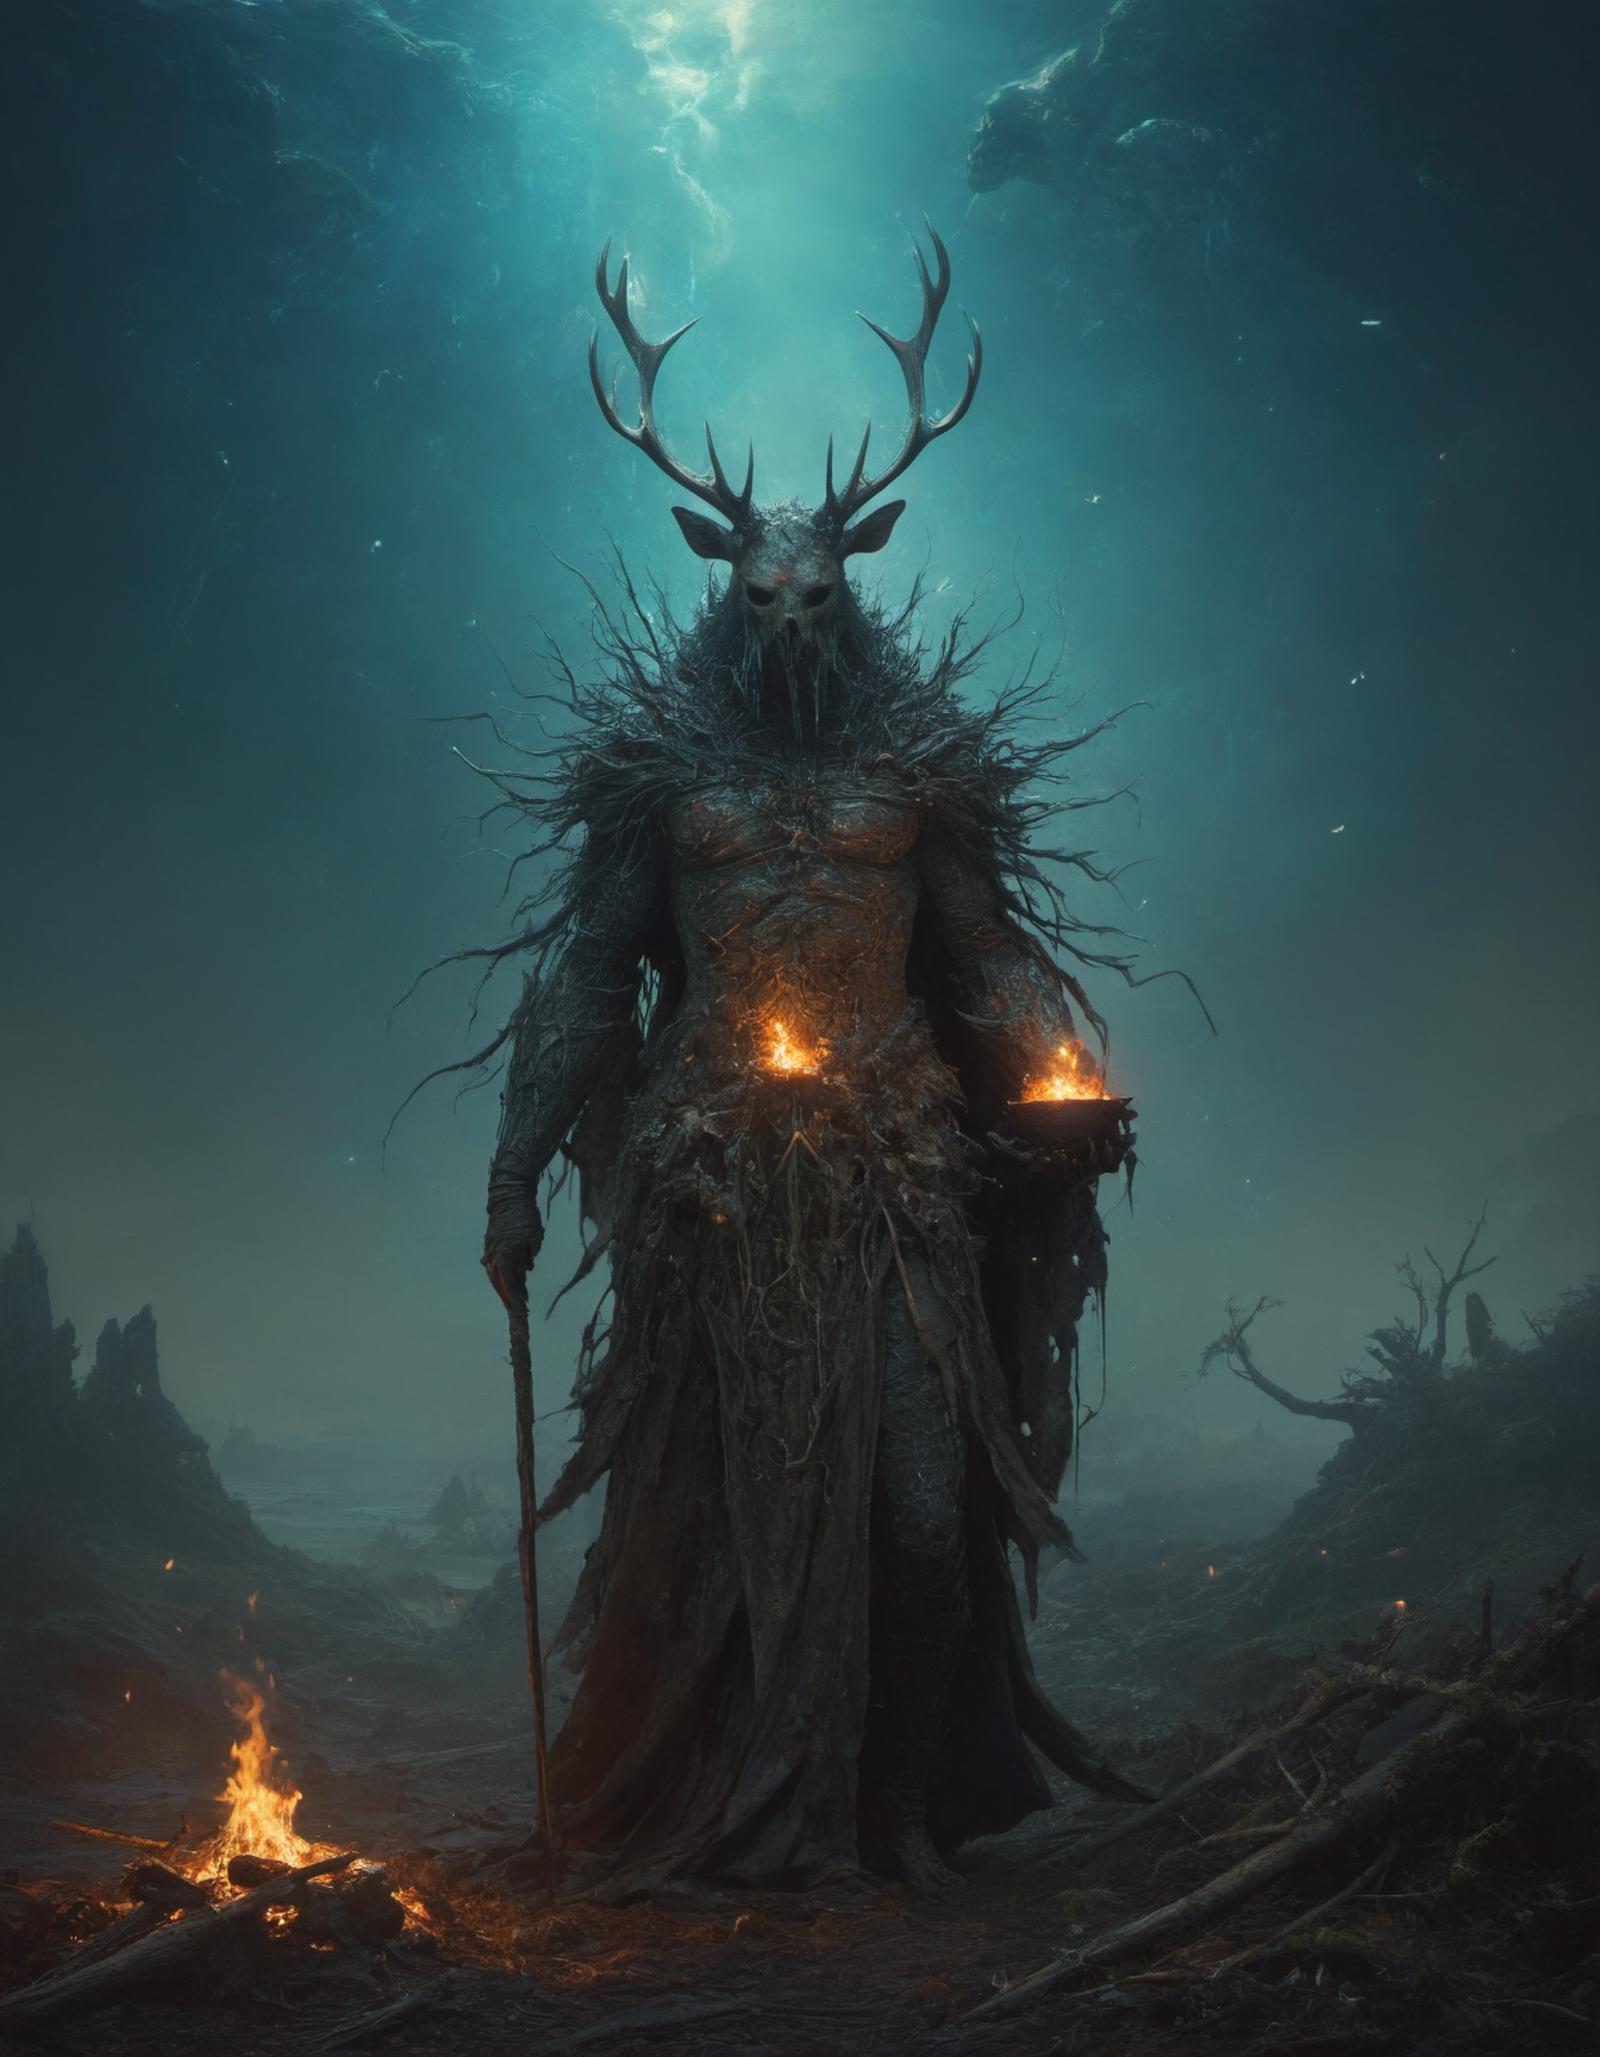 A dark and eerie image of a horned creature holding two lit torches while standing in front of a dark sky.